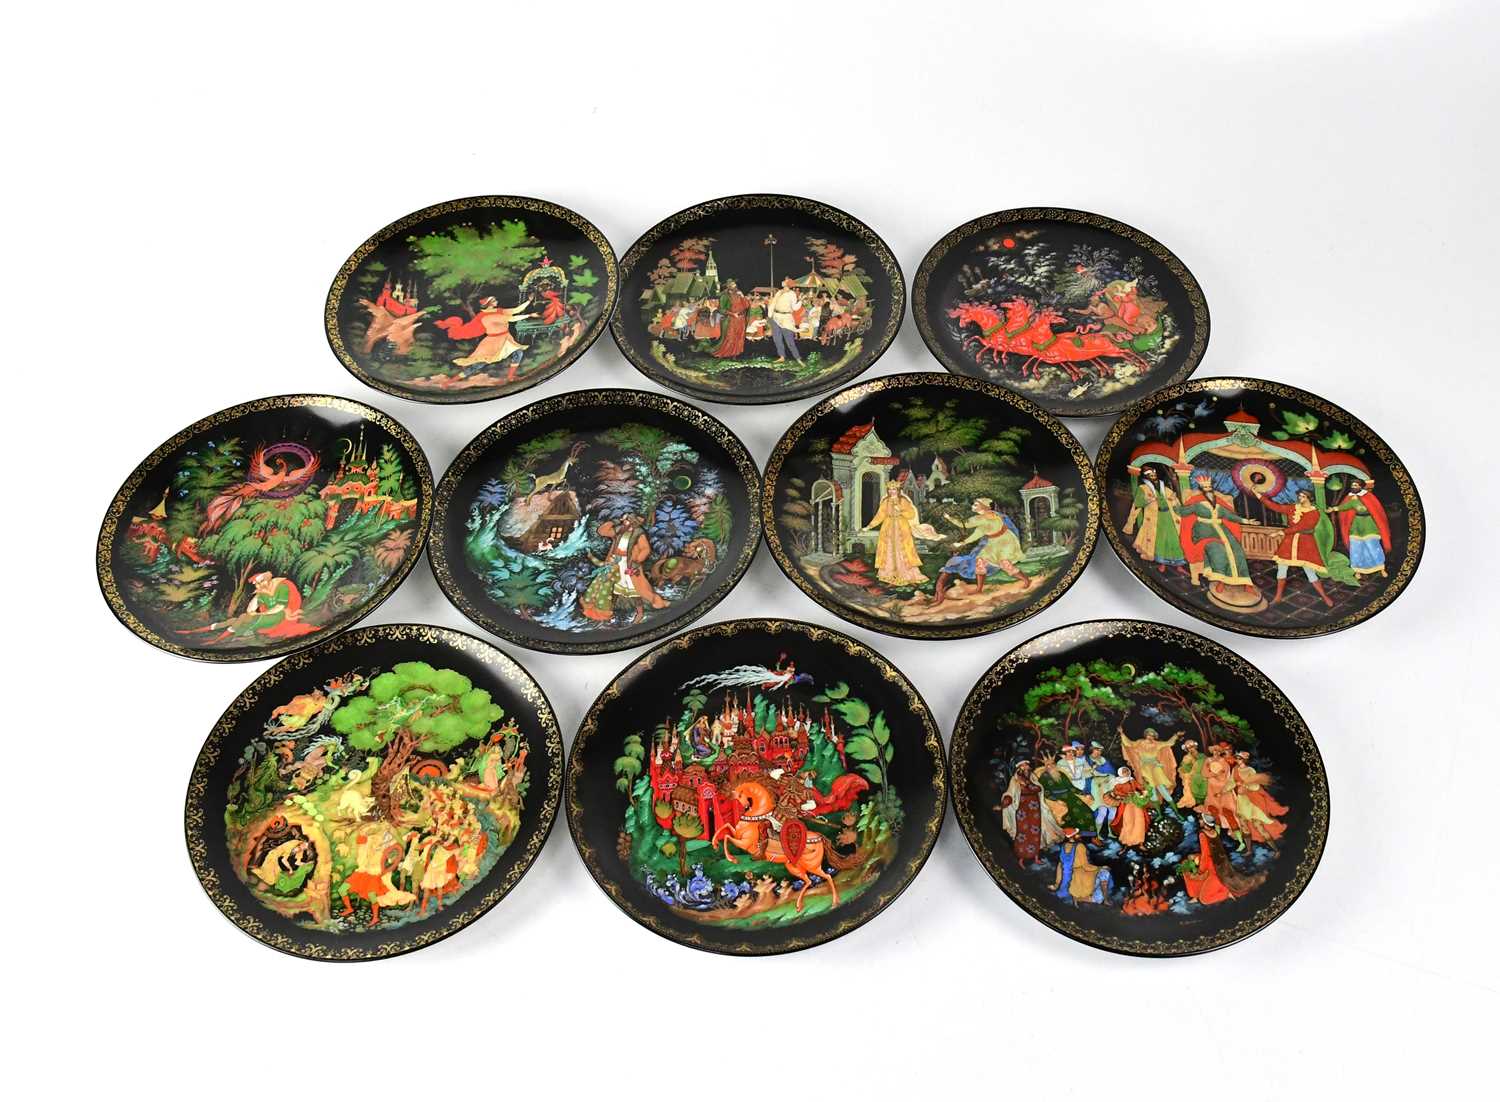 BRADFORD EXCHANGE; nineteen Russian collectors' plates dated 1989. - Image 2 of 2